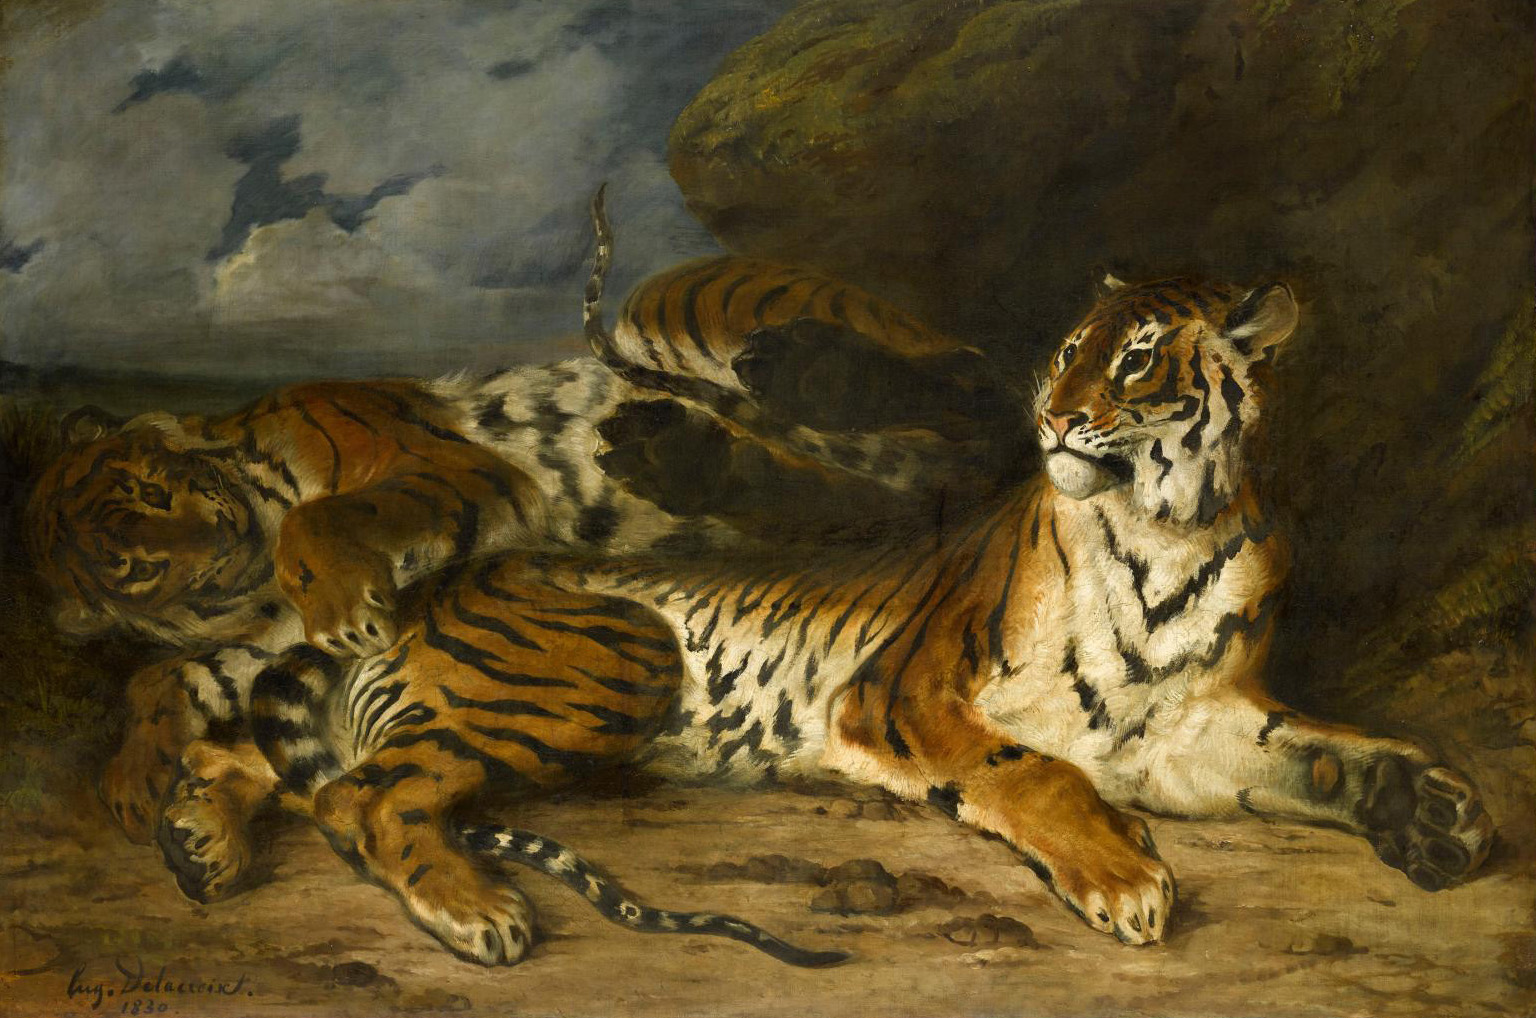 Delacroix and Nature: A Lively, Intimate Exhibition